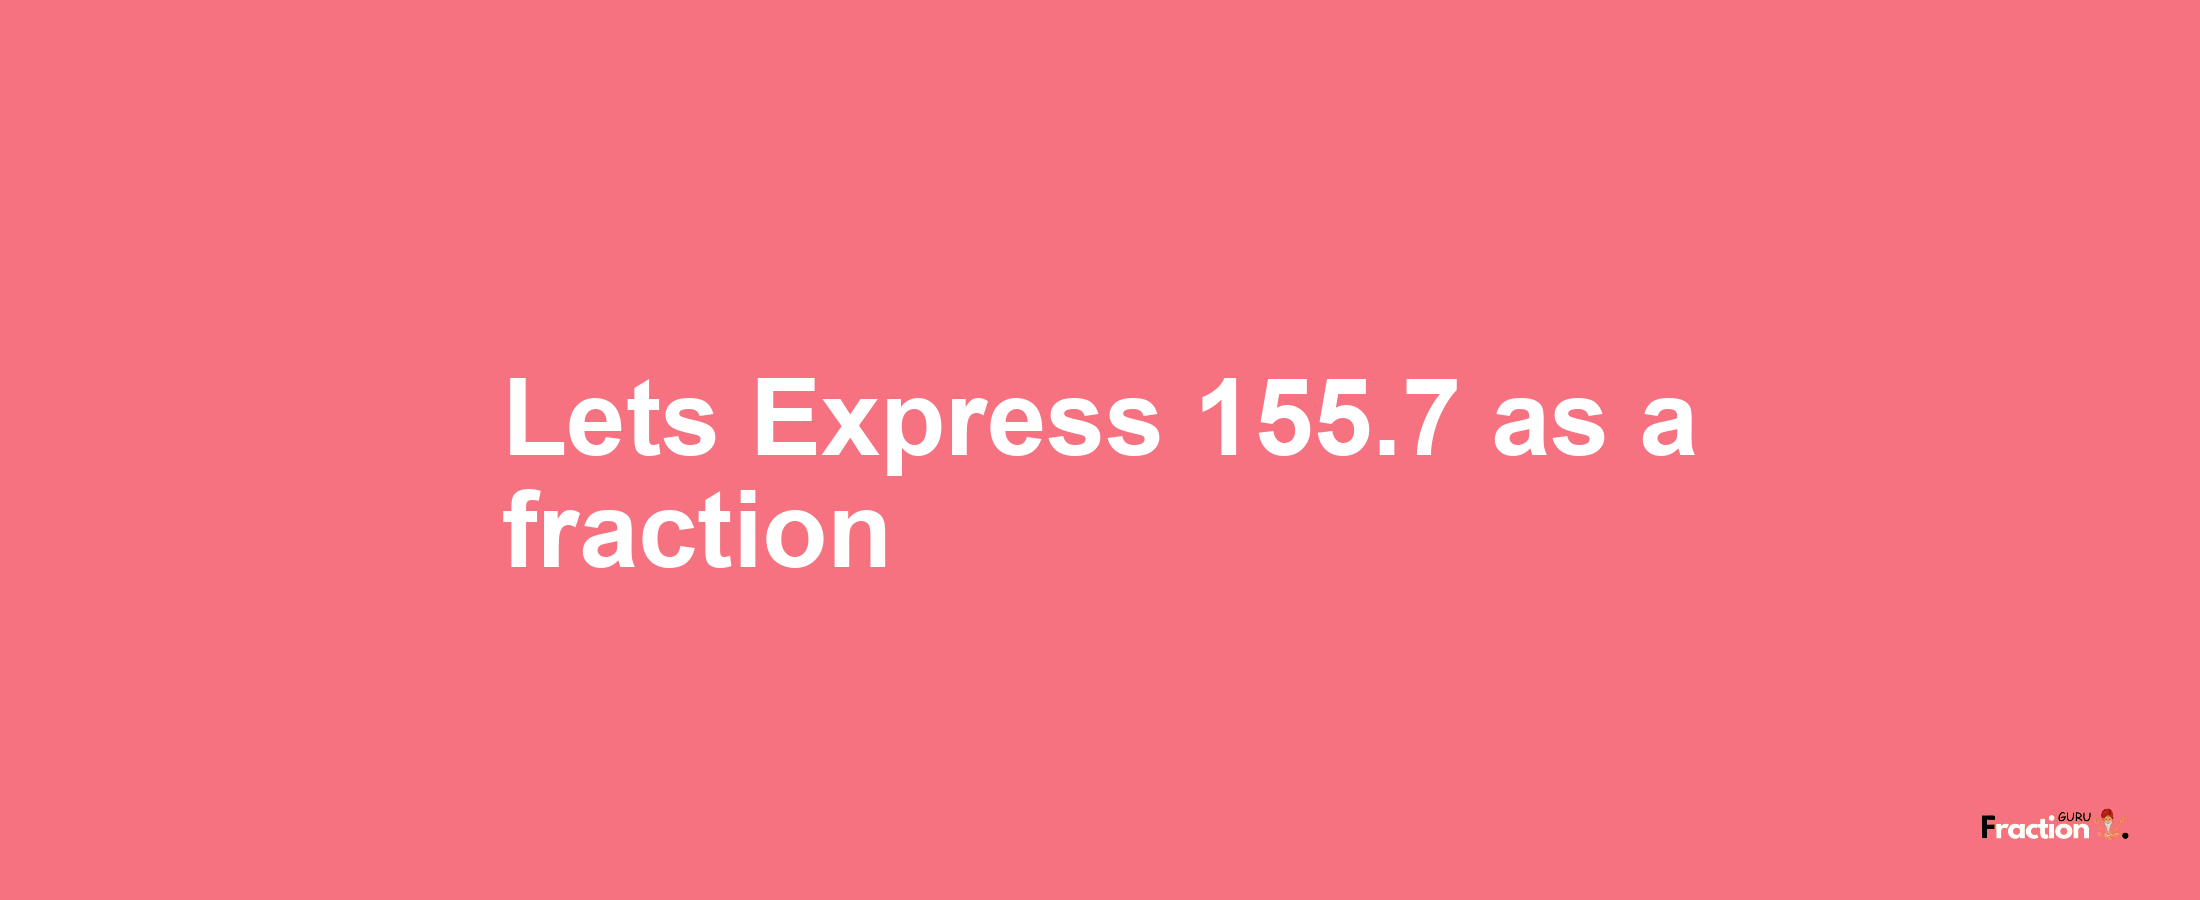 Lets Express 155.7 as afraction